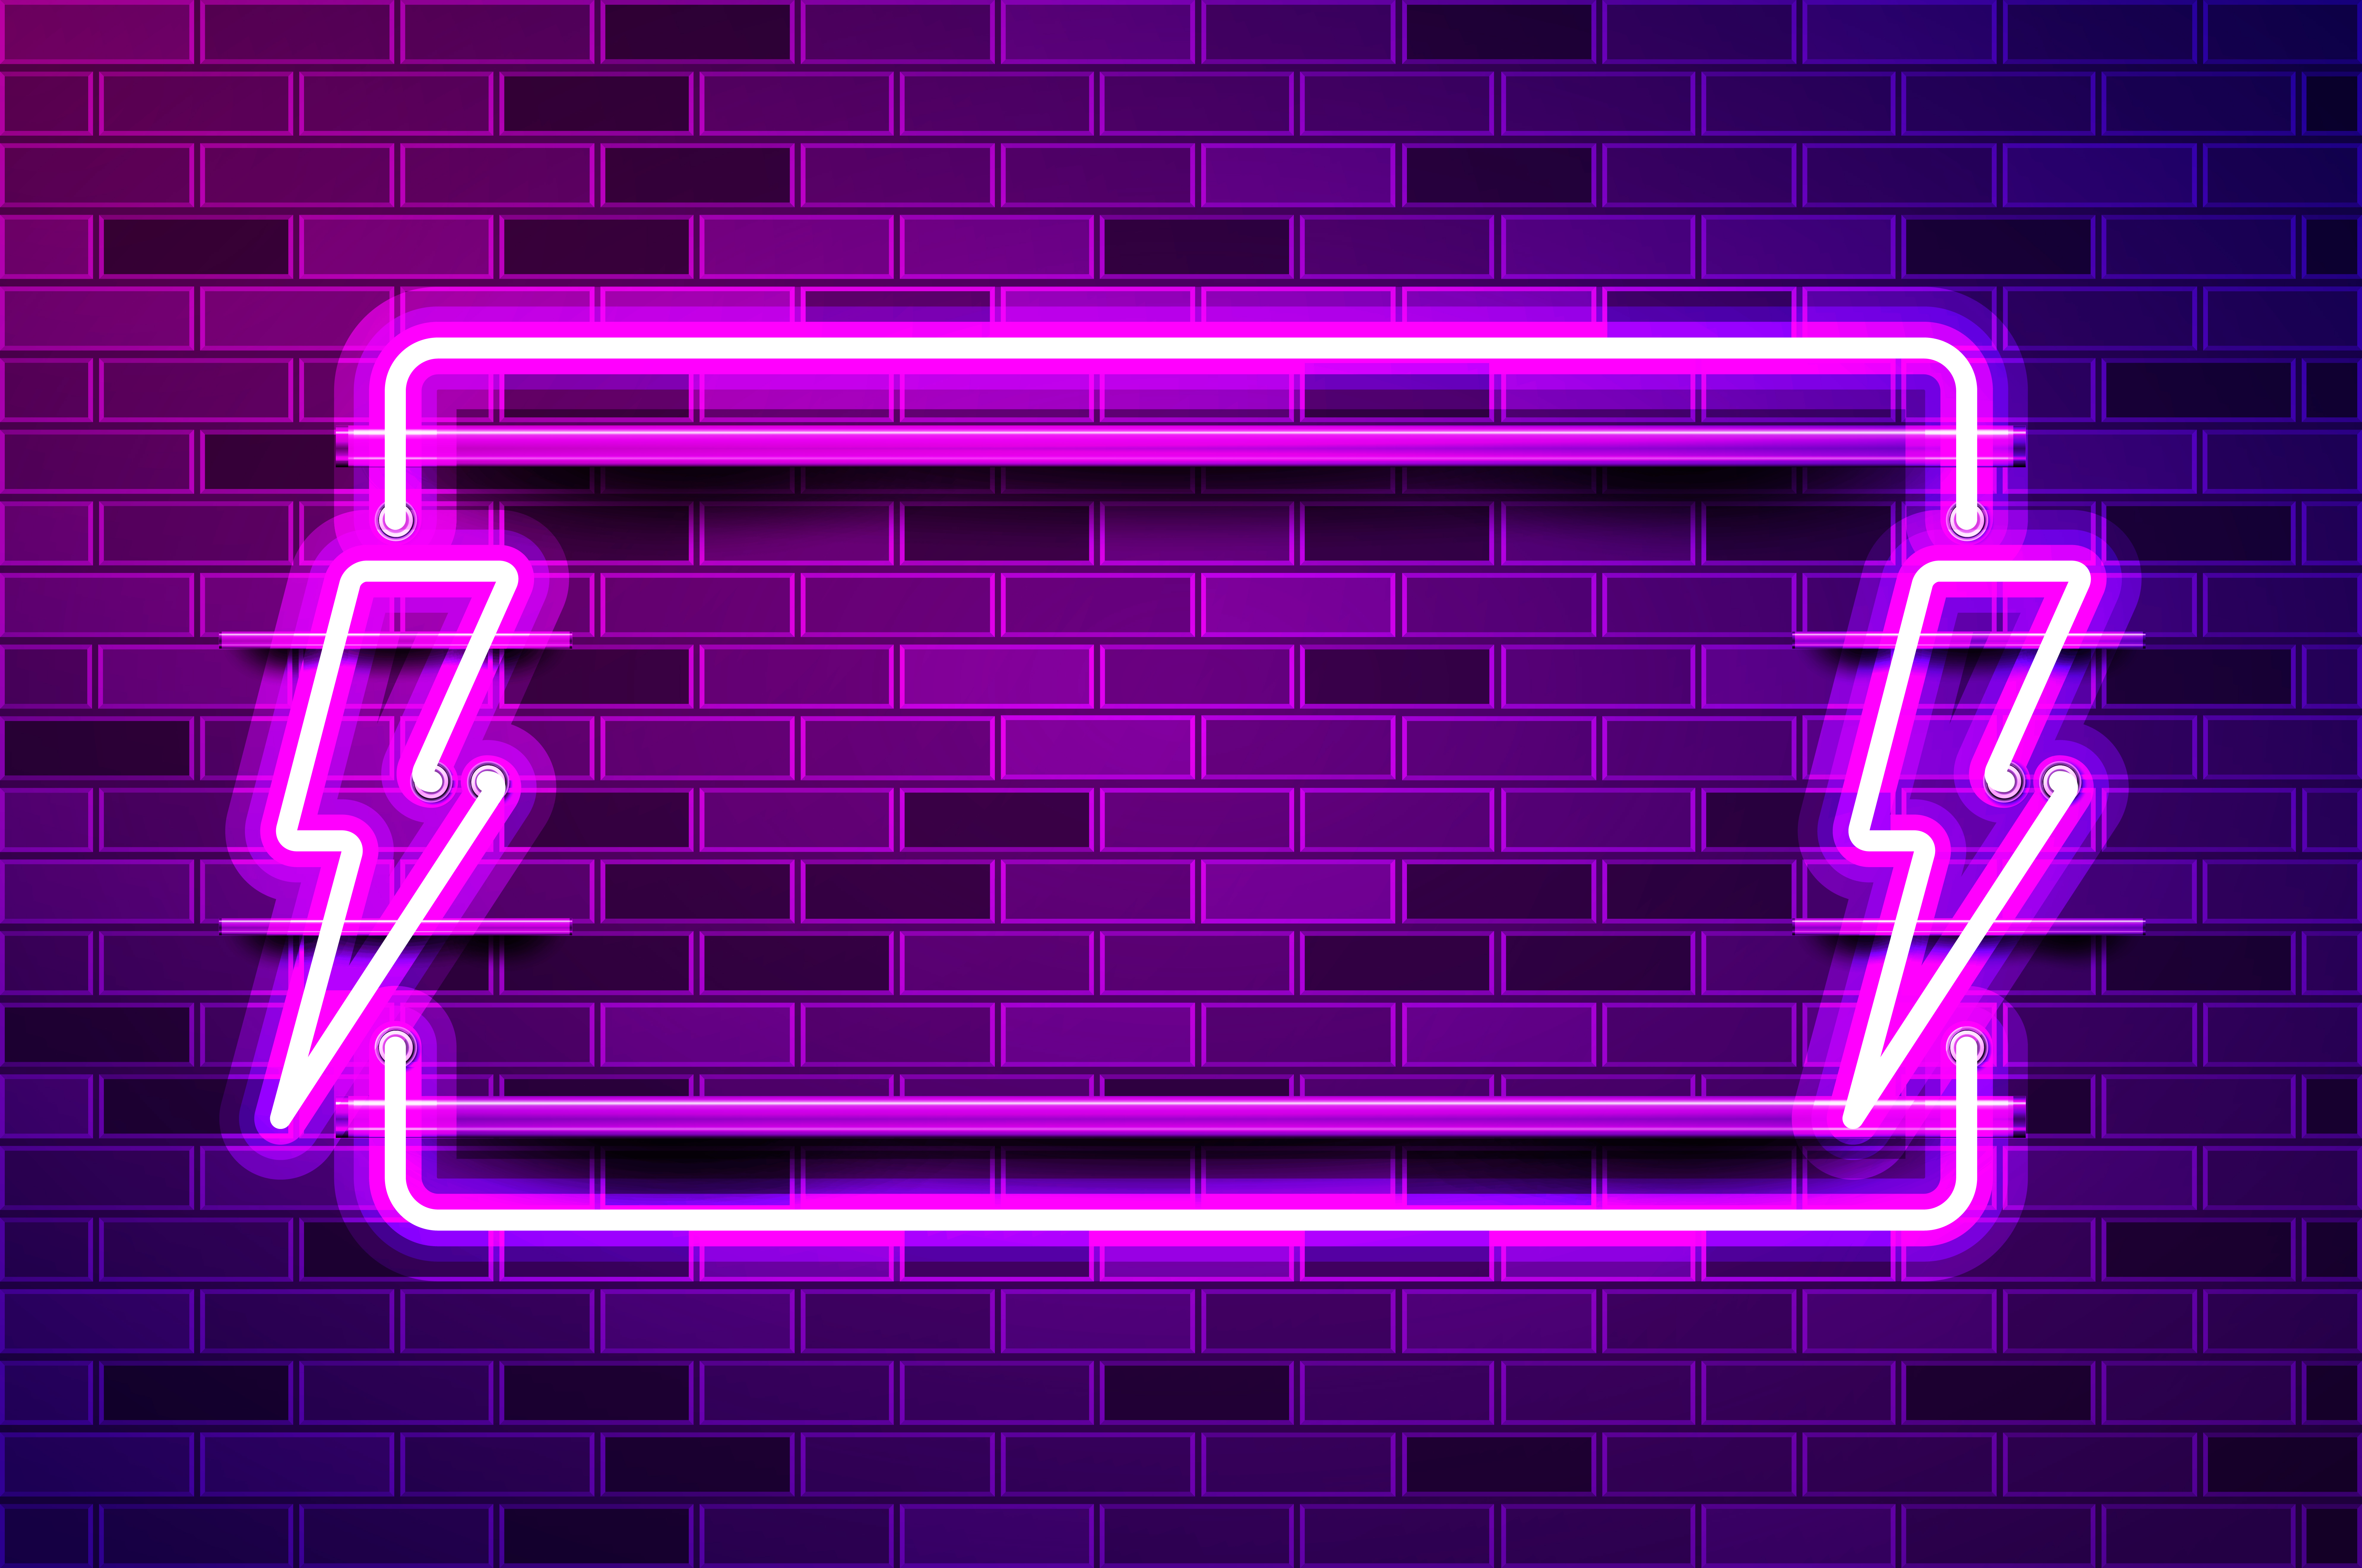 Flash sale glowing neon lamp sign. Realistic vector illustration. Purple brick wall, violet glow, metal holders.. Flash sale glowing purple neon lamp sign